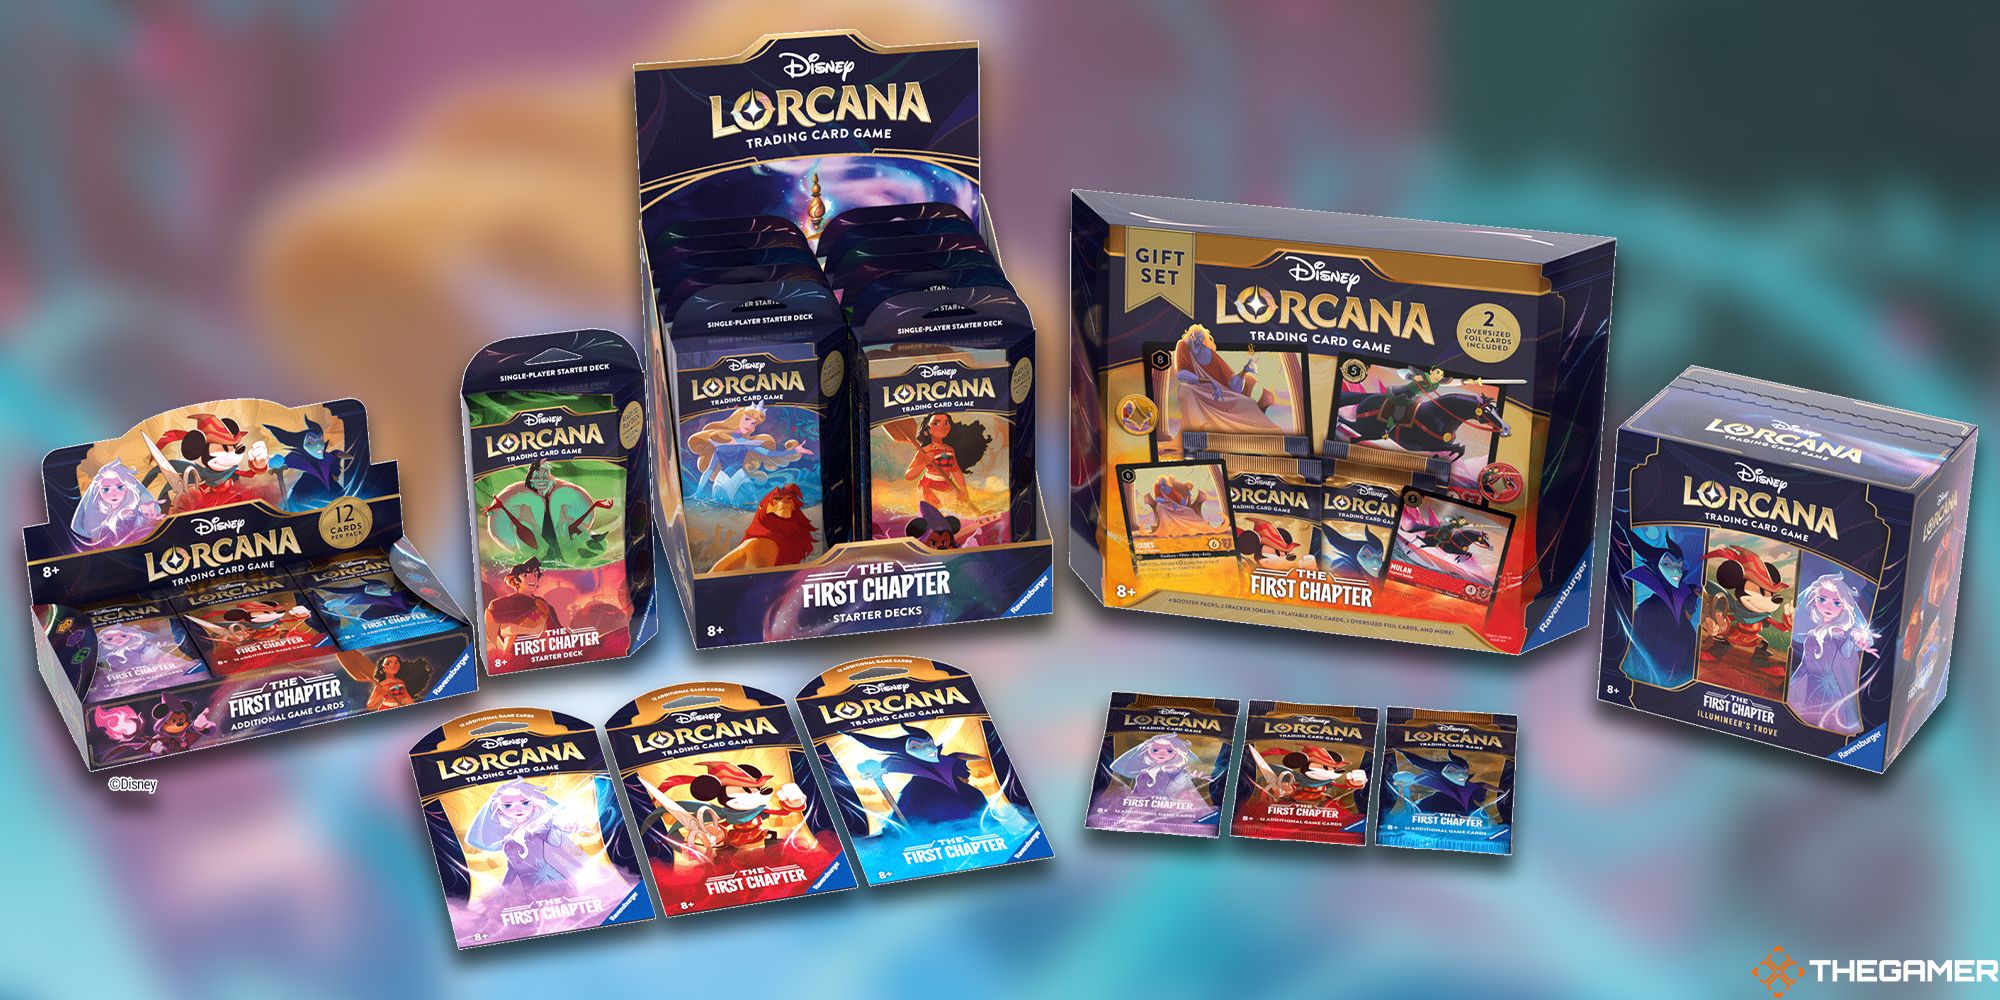 Lorcana's launch products.